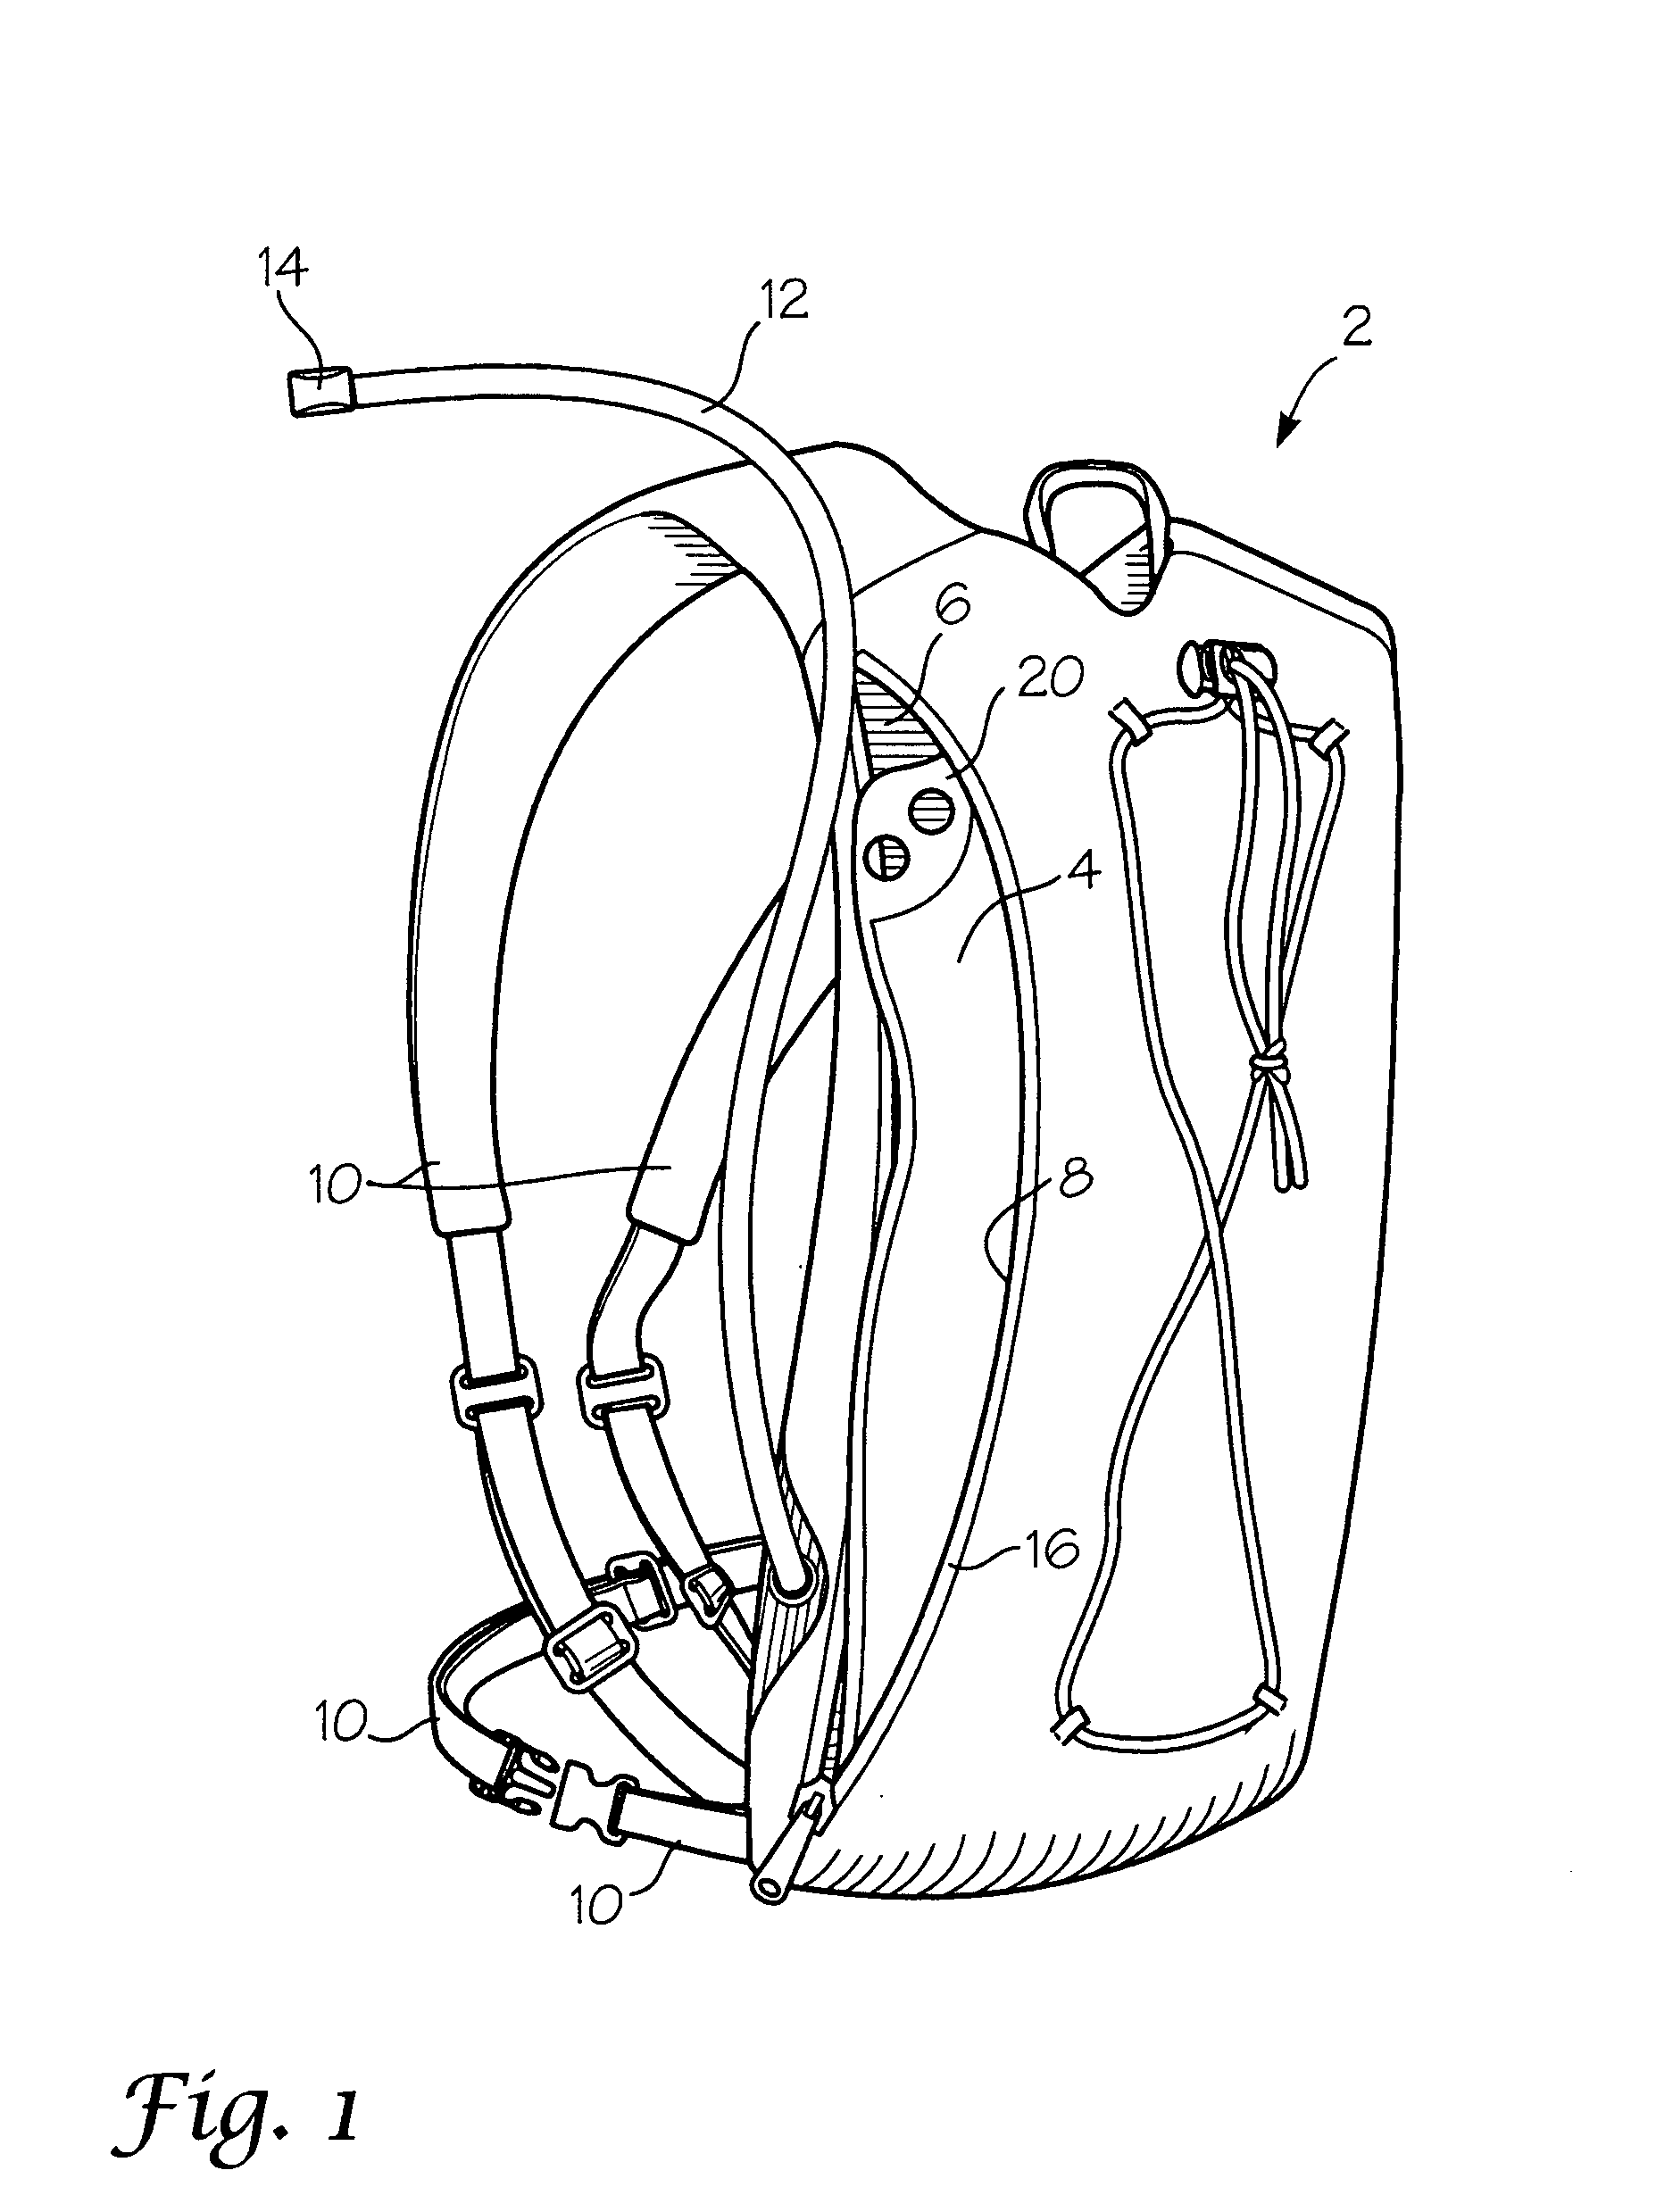 Disposable pouch hydration system